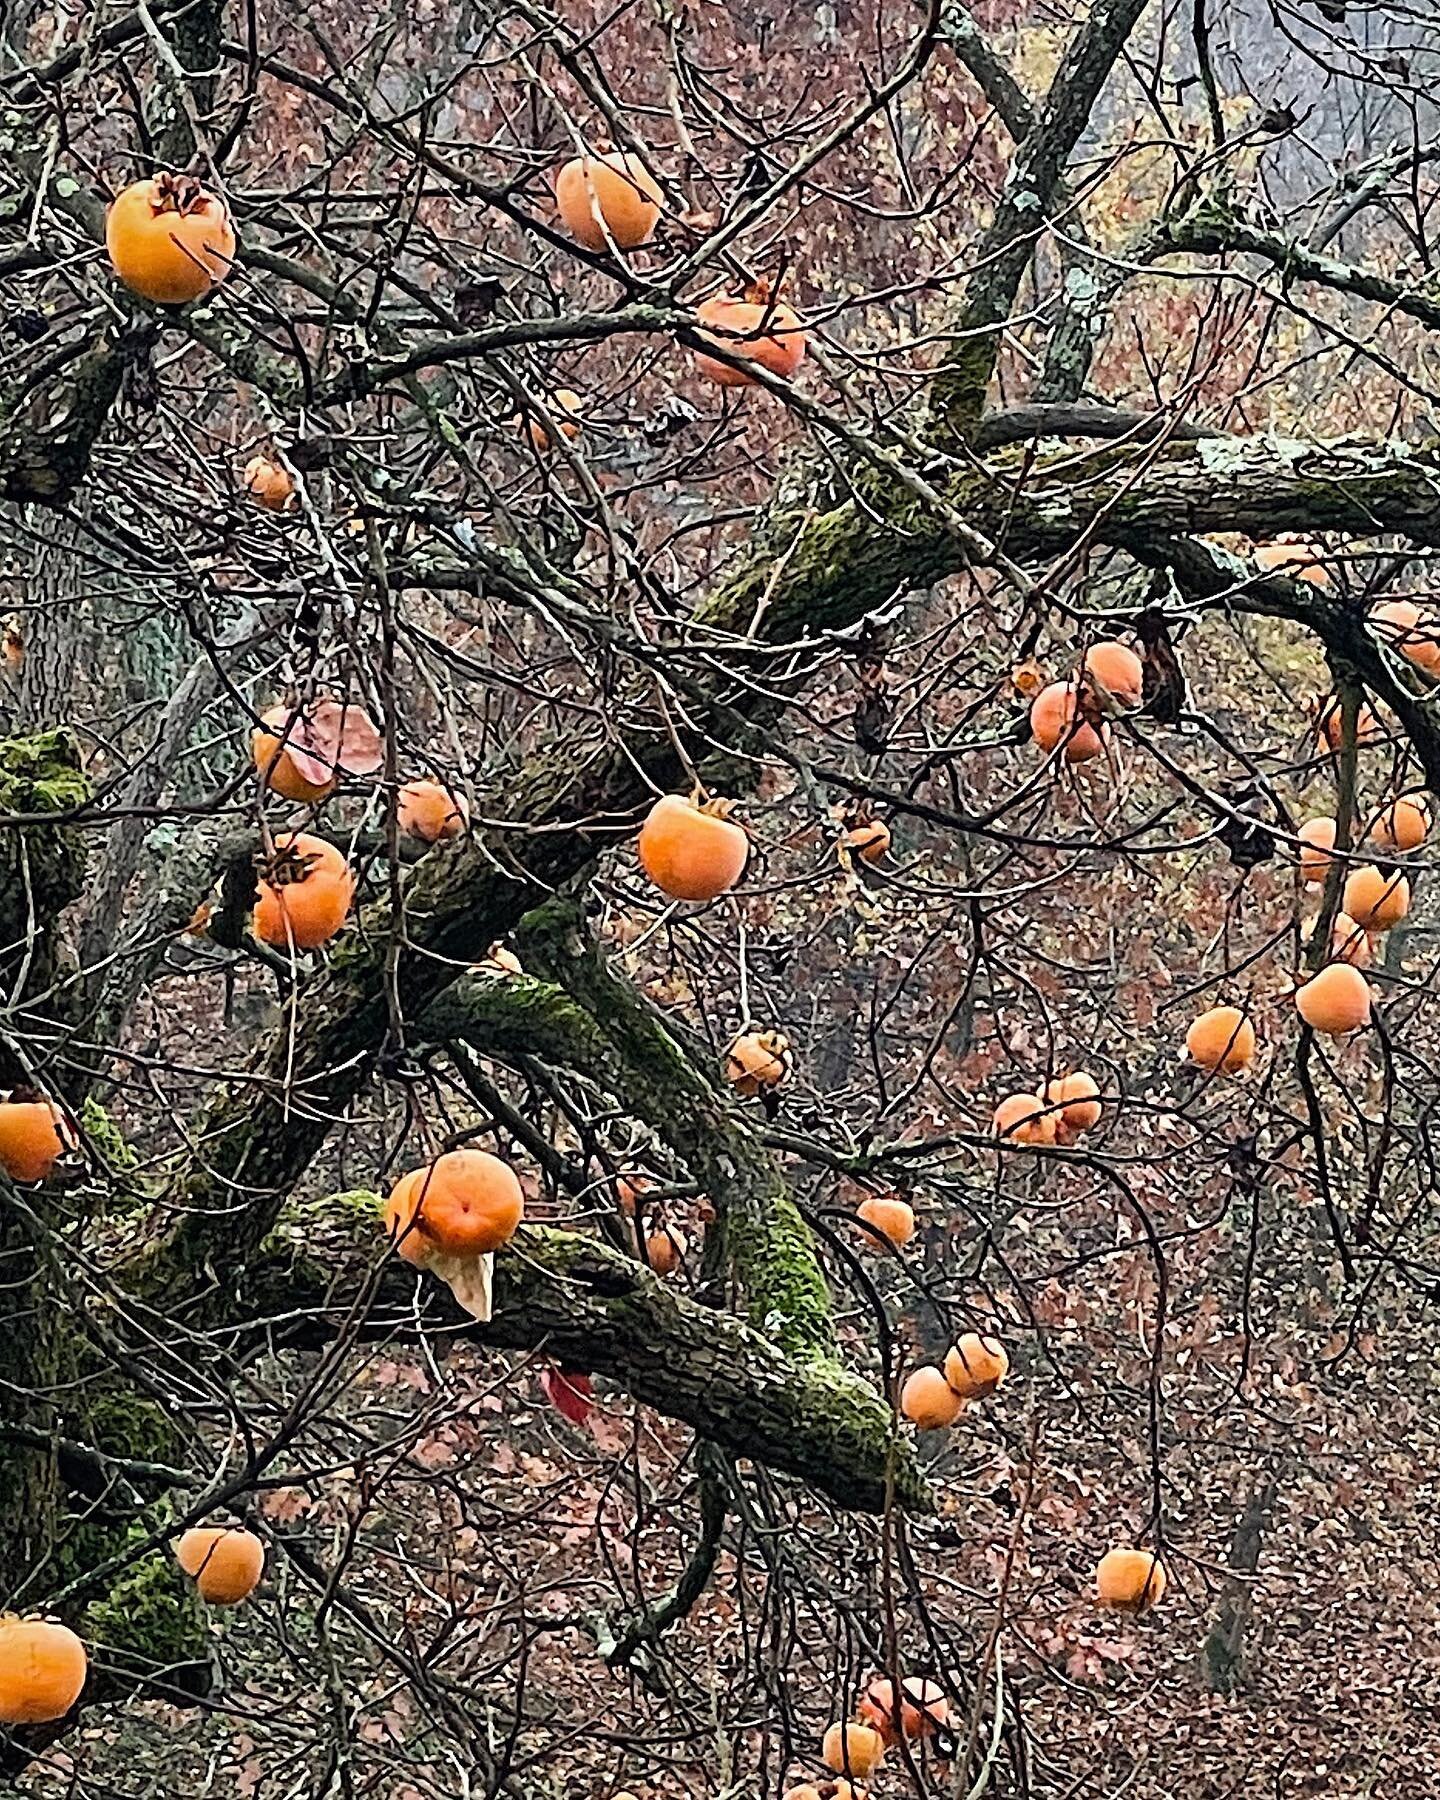 On the last official day of #fall, here&rsquo;s one of my favorite autumnal markers: the #persimmon tree! 🧡🍂

Look at it in all its peculiar glory: the glowing orange globes hanging from the stark and gnarly branches, dazzling the grey countryside 